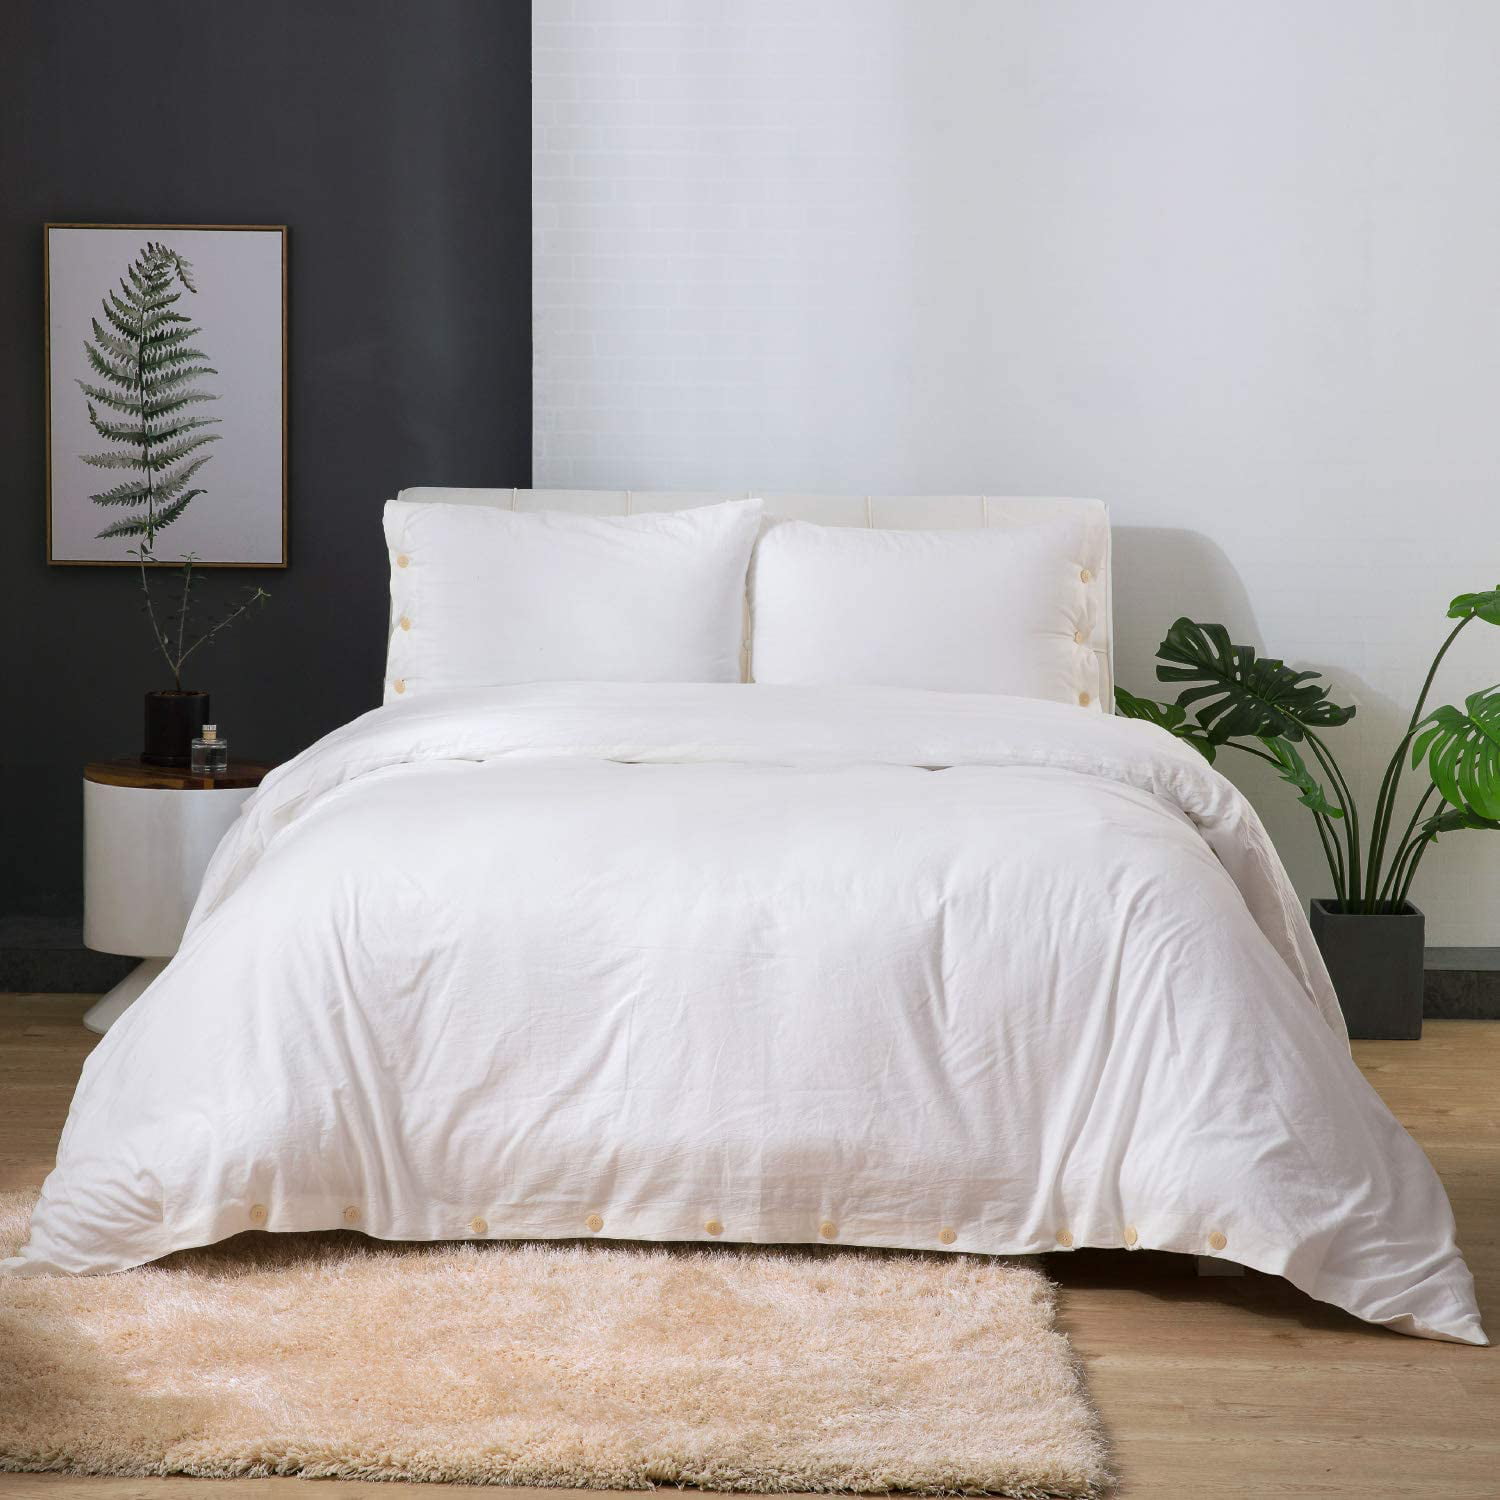 Washed Cotton Duvet Cover Sets Queen, Soft White Duvet Cover Queen